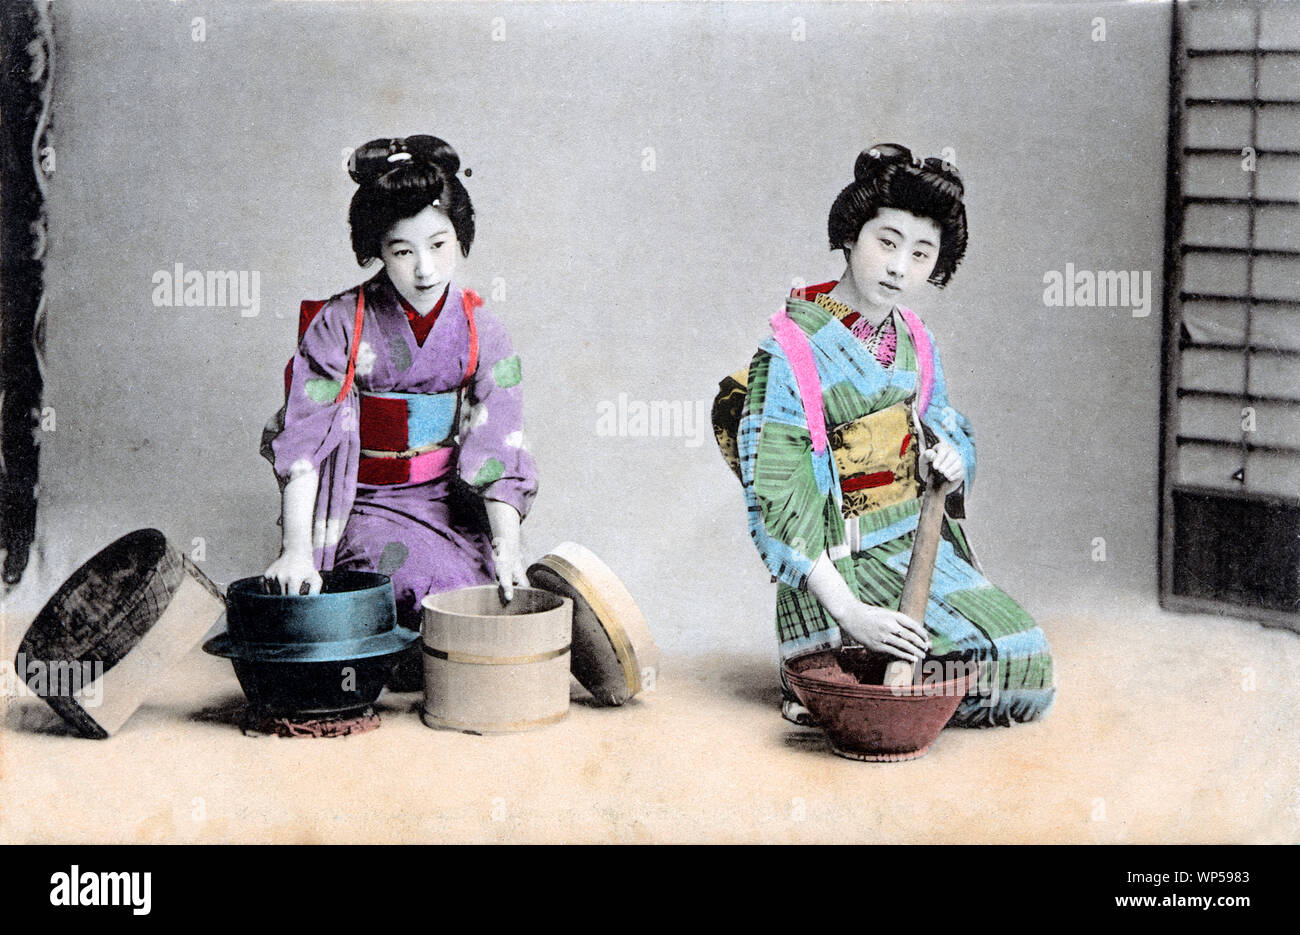 [ 1910s Japan - Japanese Kitchen Work ] —   In this studio photo of daily kitchen work, two women in kimono show typical Japanese kicthen dusties.  The woman on the right is grinding something in an earthenware suribachi (mortar). The other is holding a tetsunabe (iron pot) for cooking rice and an oke (wooden bucket).  20th century vintage postcard. Stock Photo